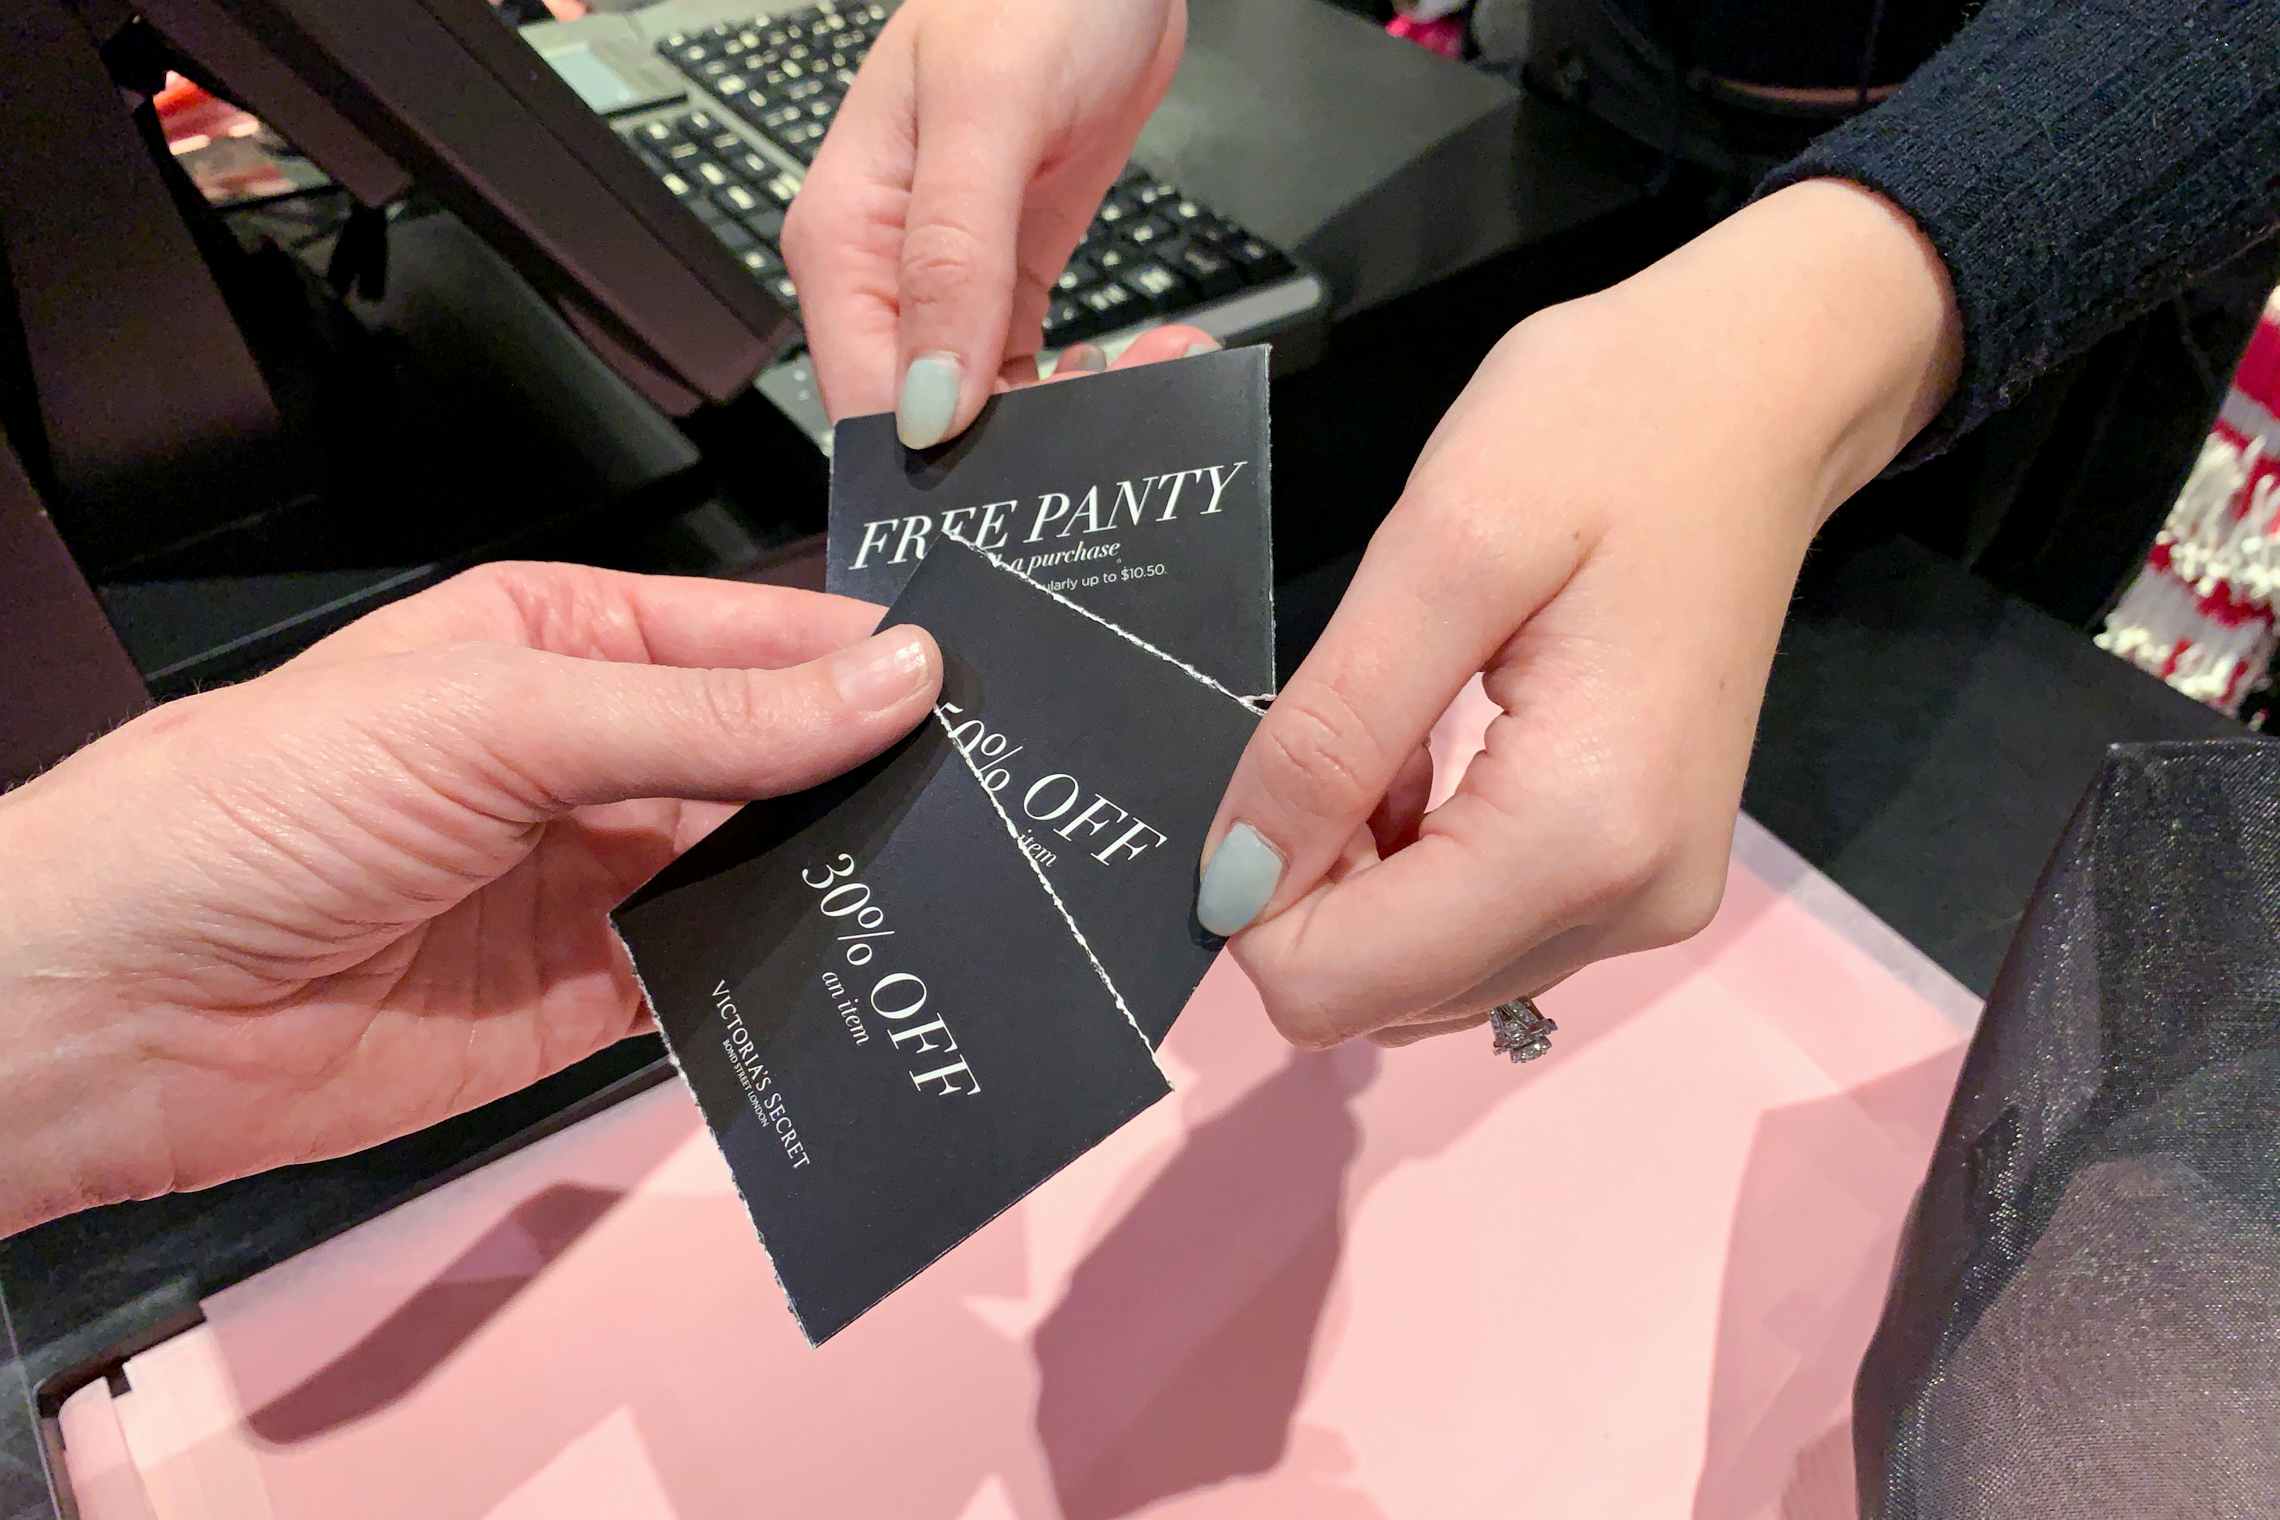 a Victoria's Secret employee handing some coupons to a customer at checkout